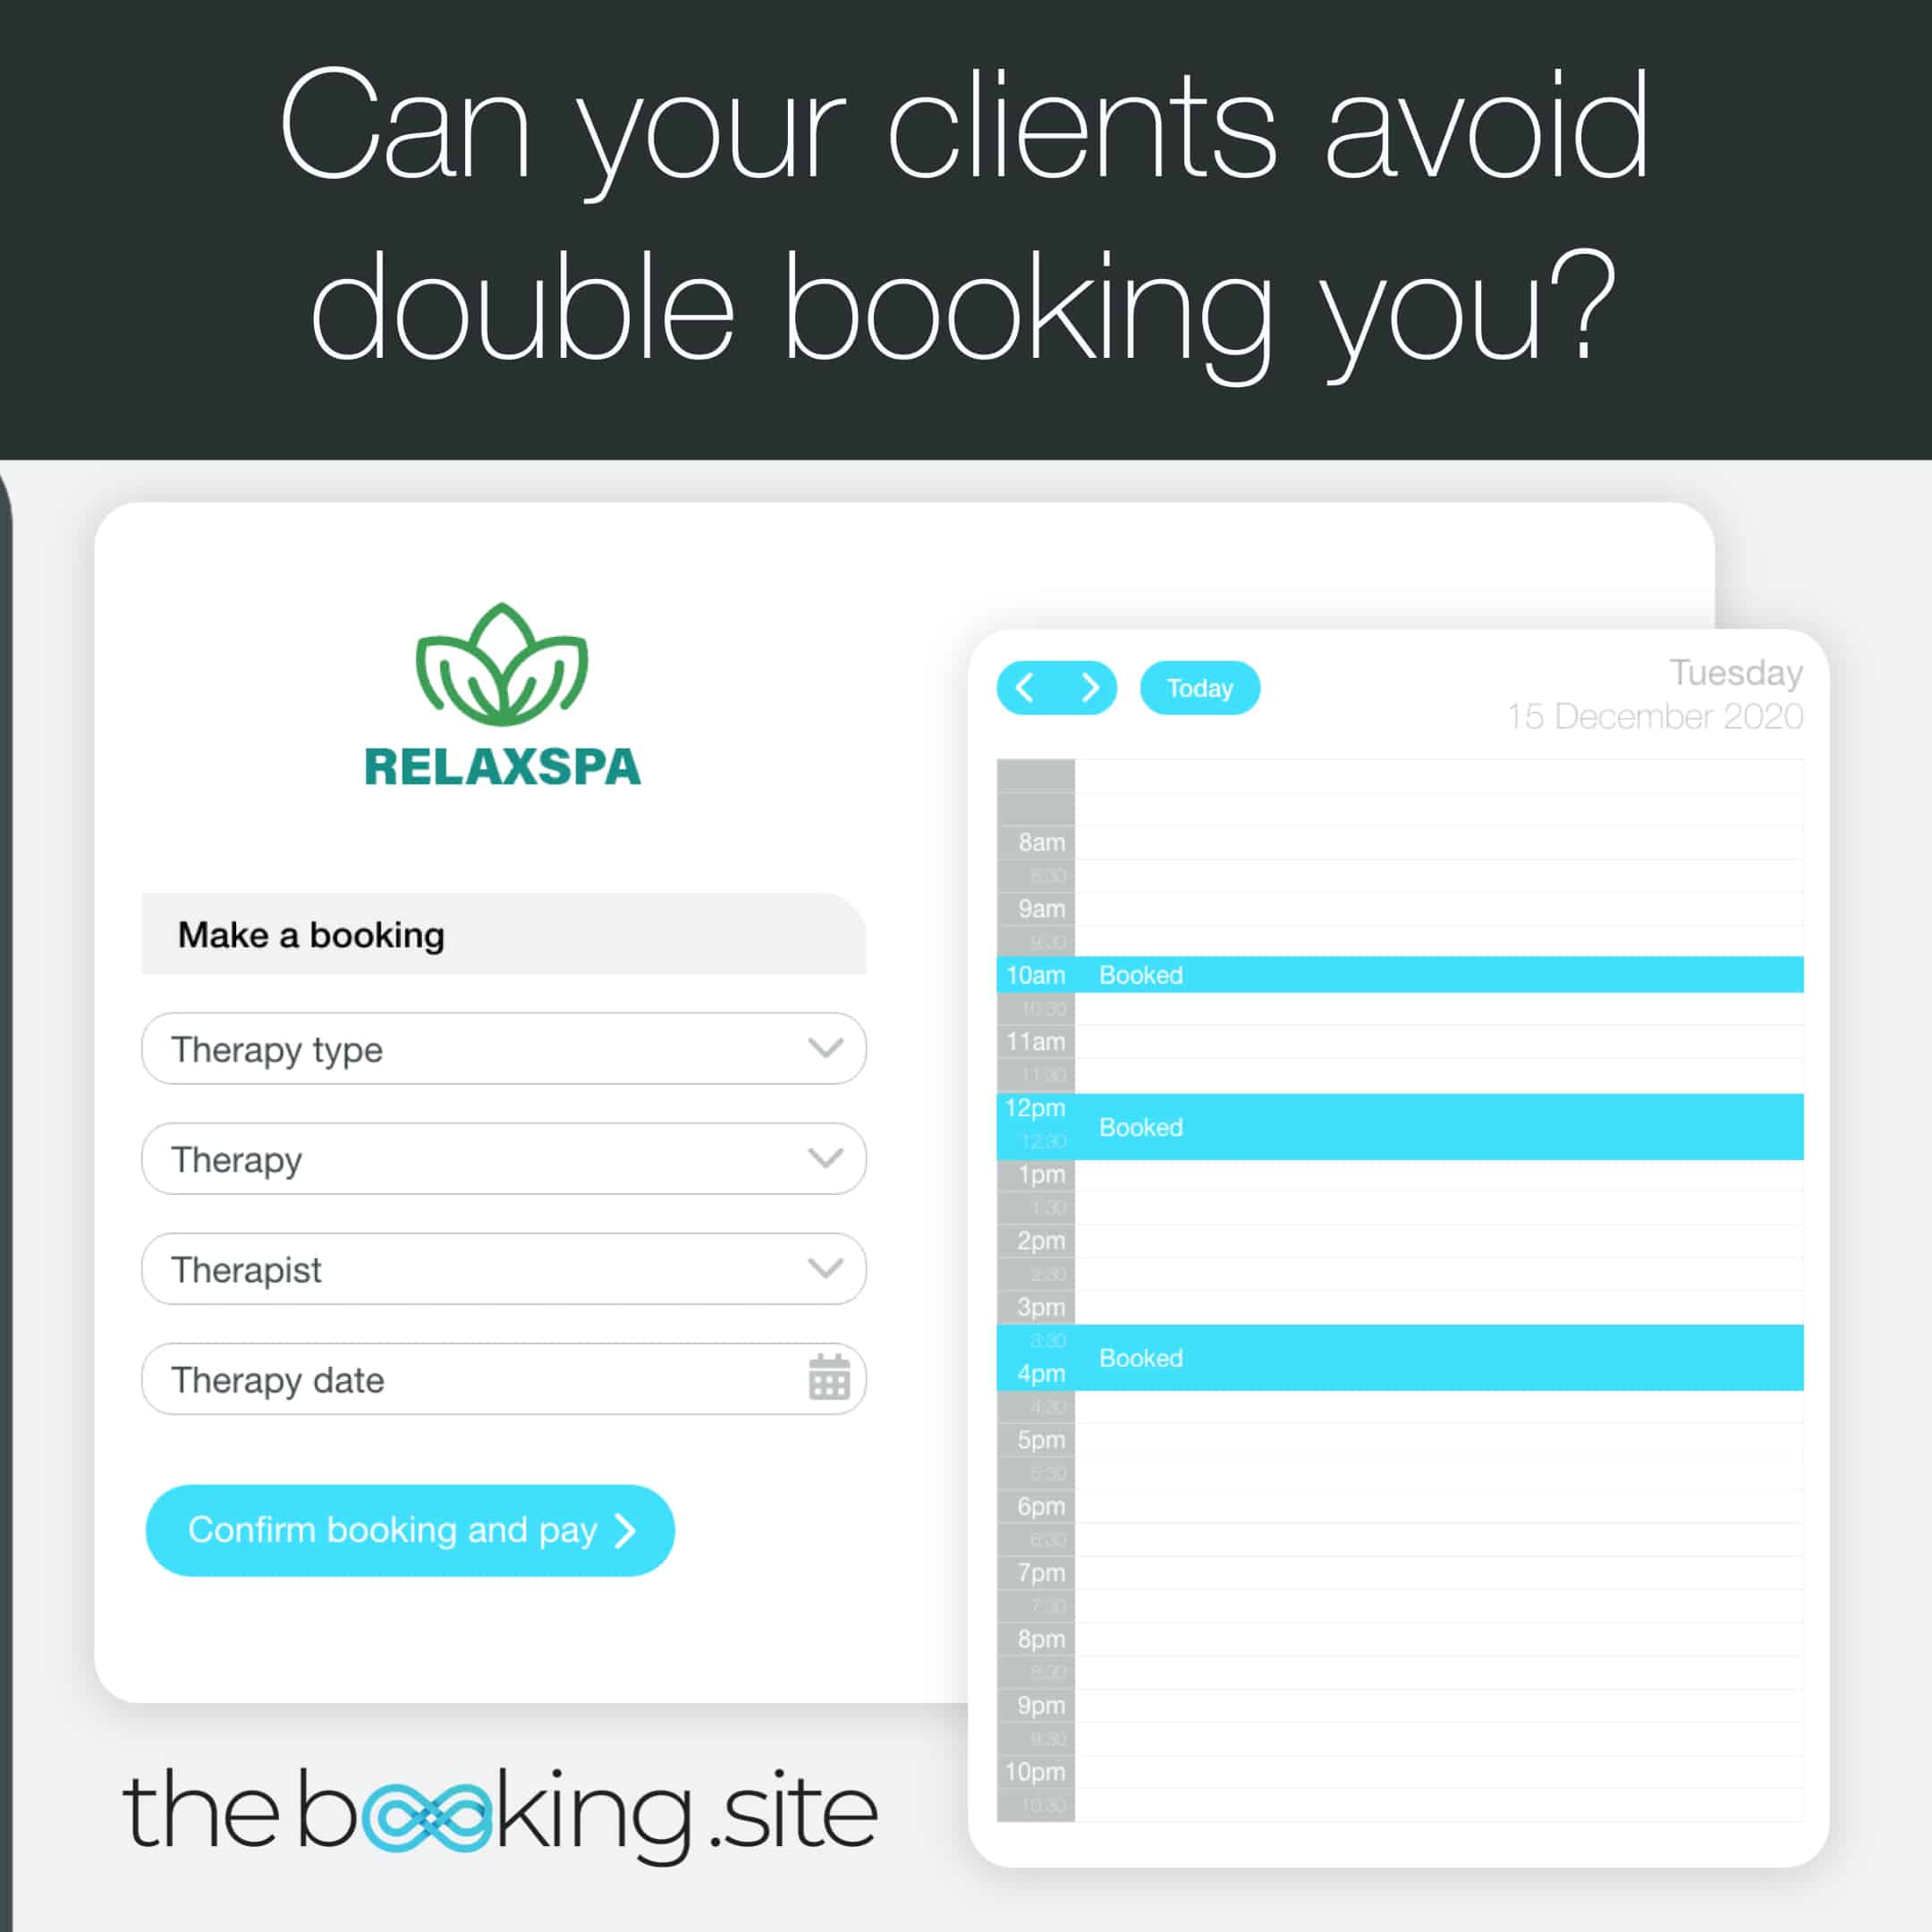 Avoid double bookings by using thebooking.site